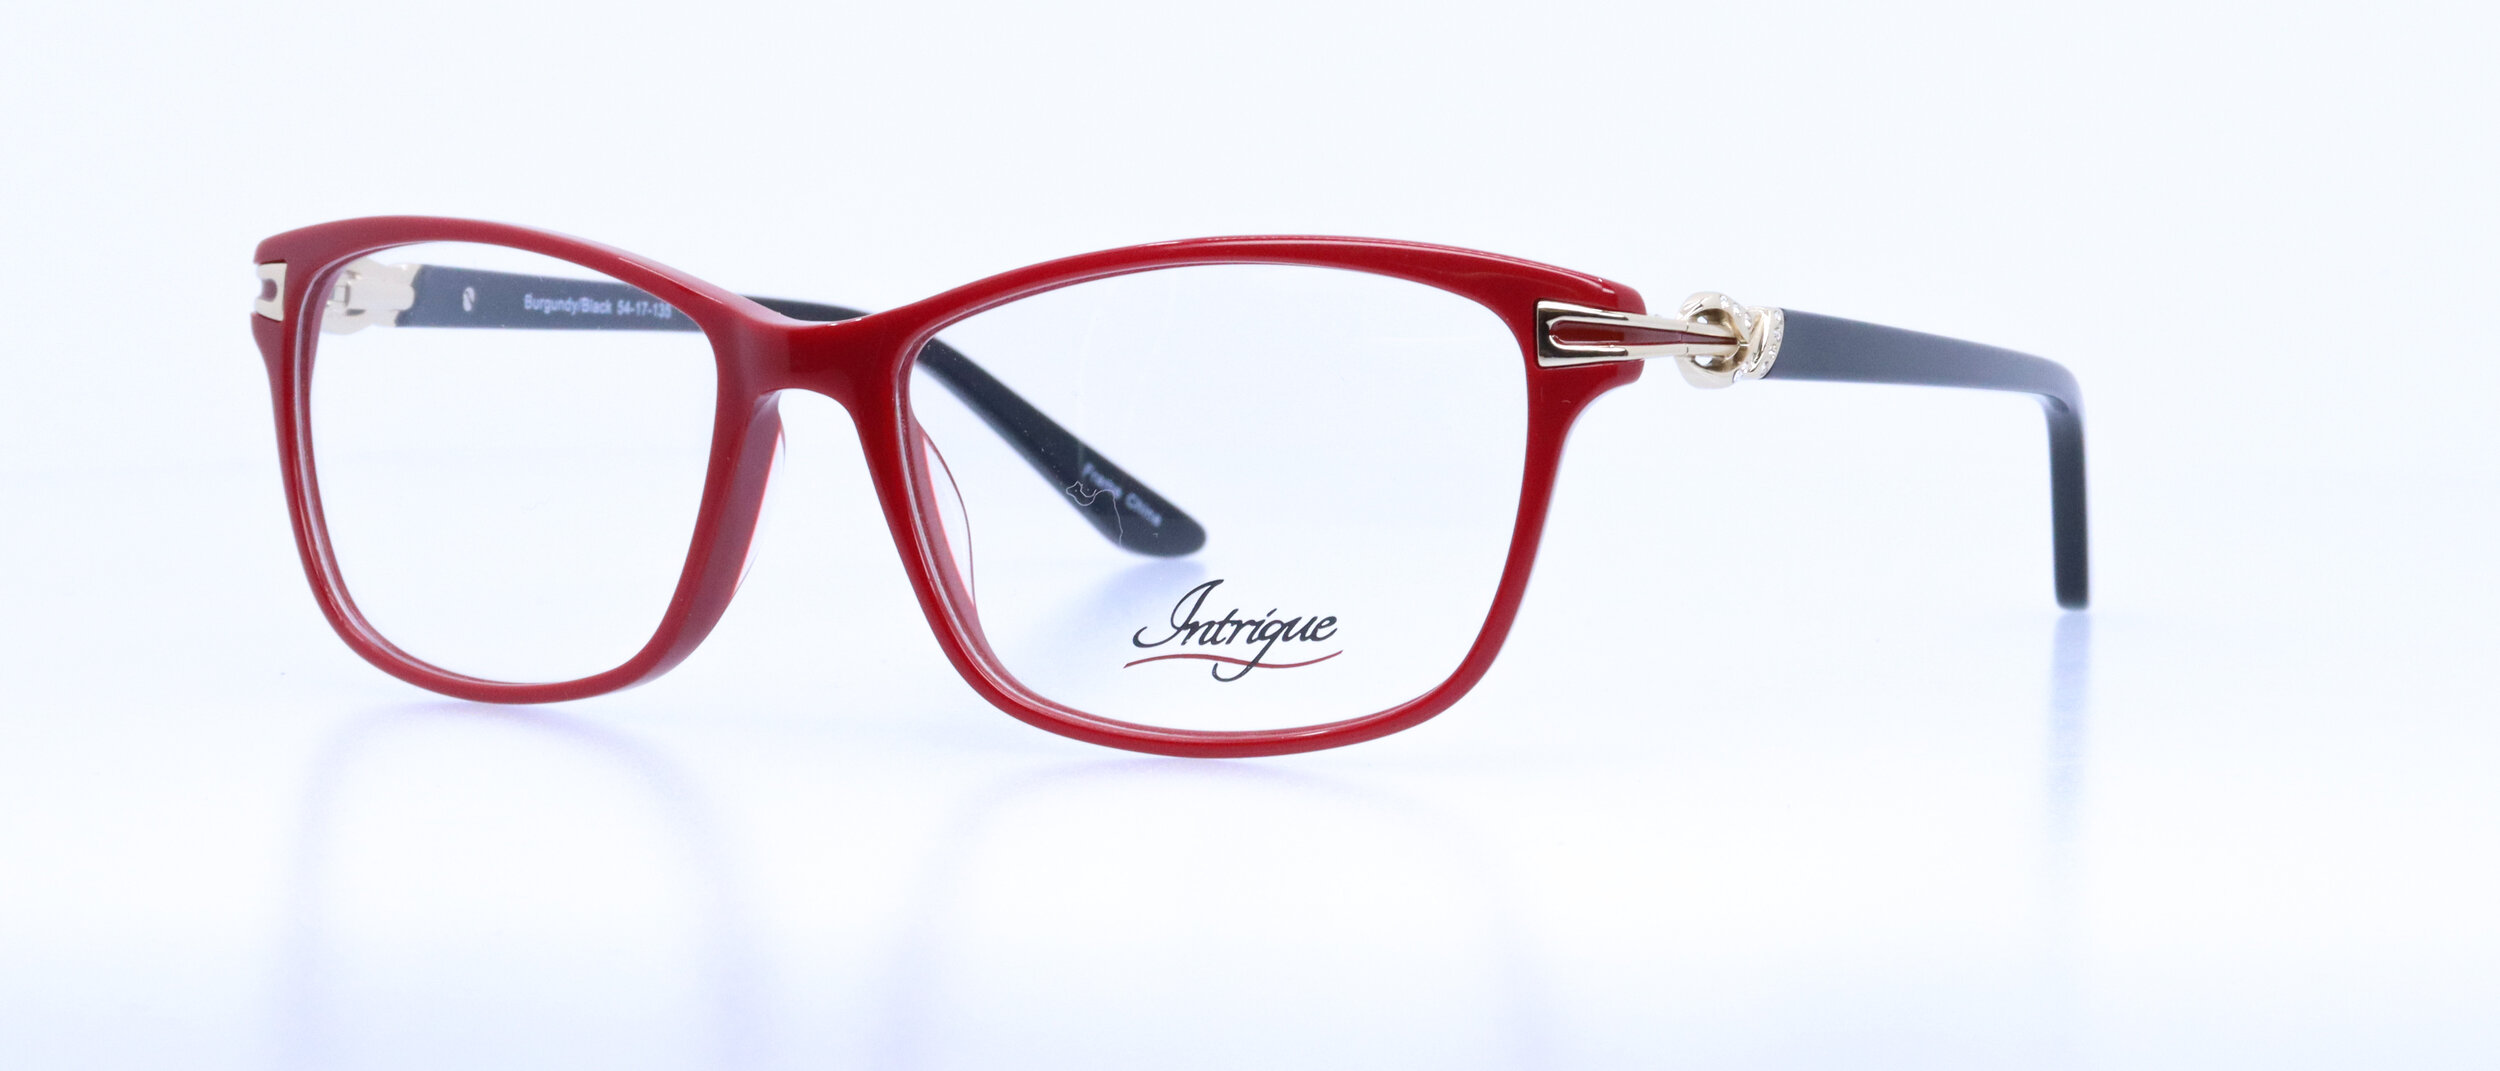  INT201: 54-16-135, Available in Burgundy/Black or Tortoise/Purple 